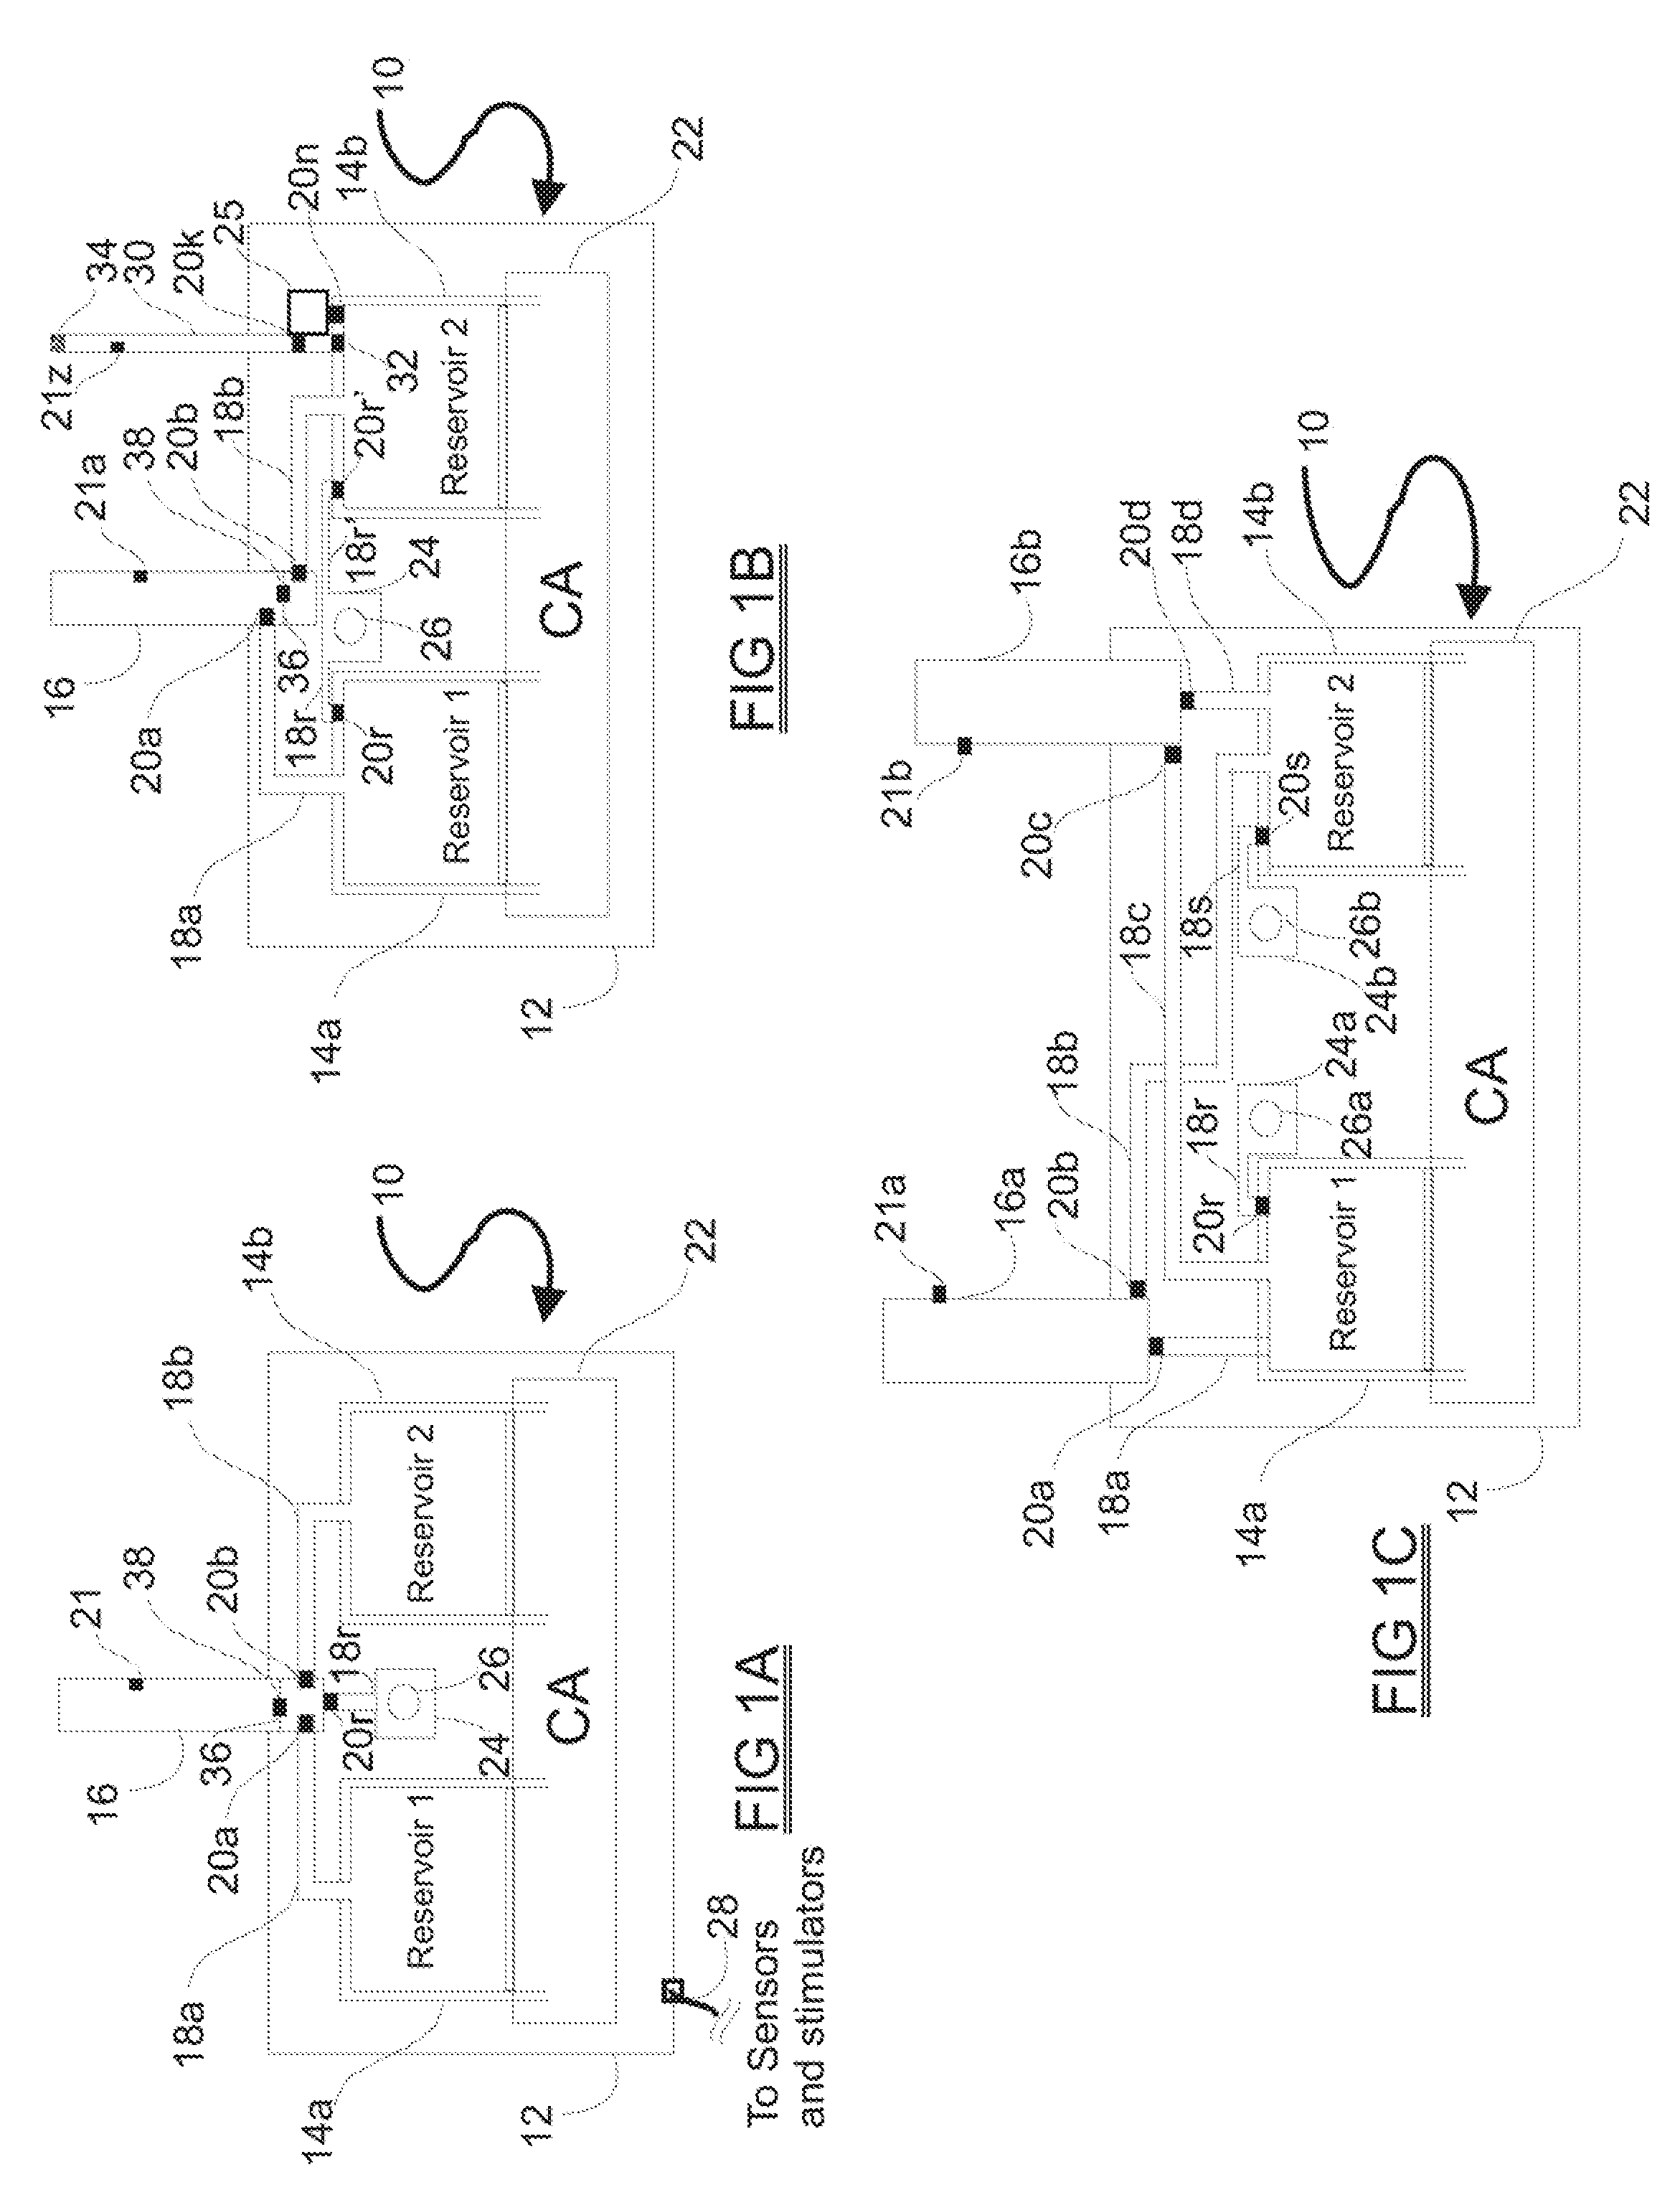 Programmable medical drug delivery systems and methods for delivery of multiple fluids and concentrations